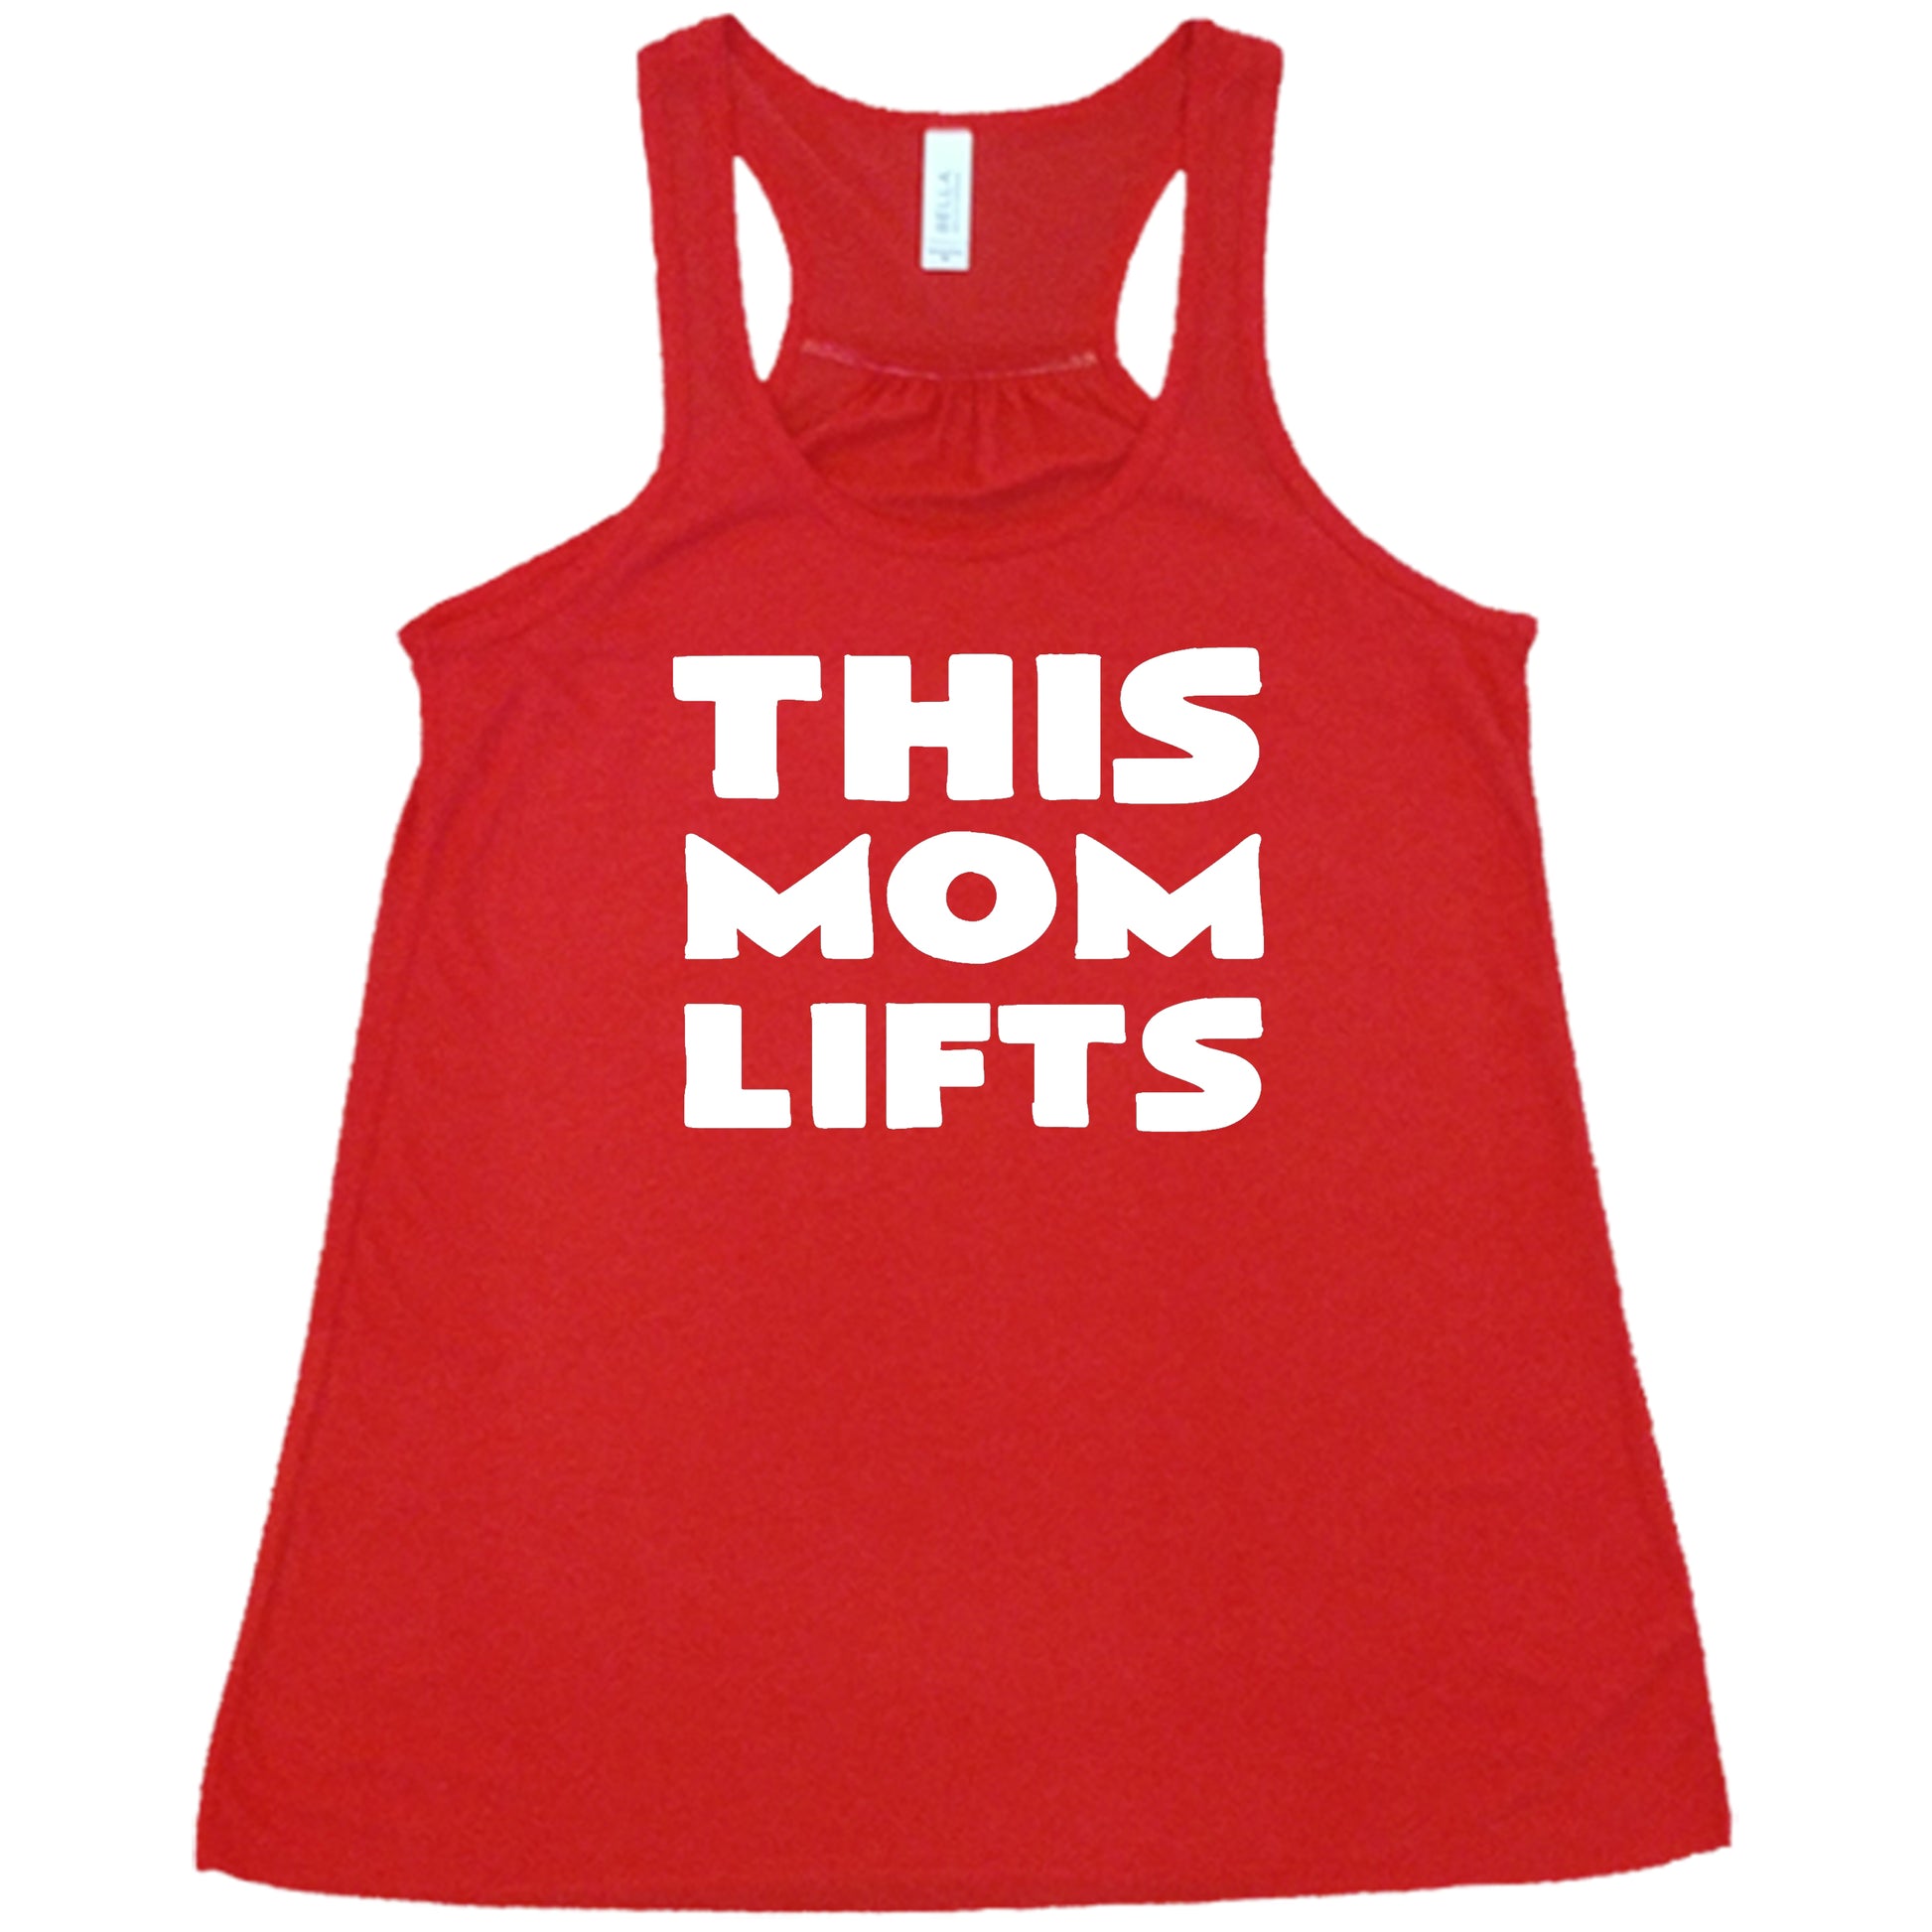 red racerback shirt with the saying "this mom lifts" in the center in white lettering